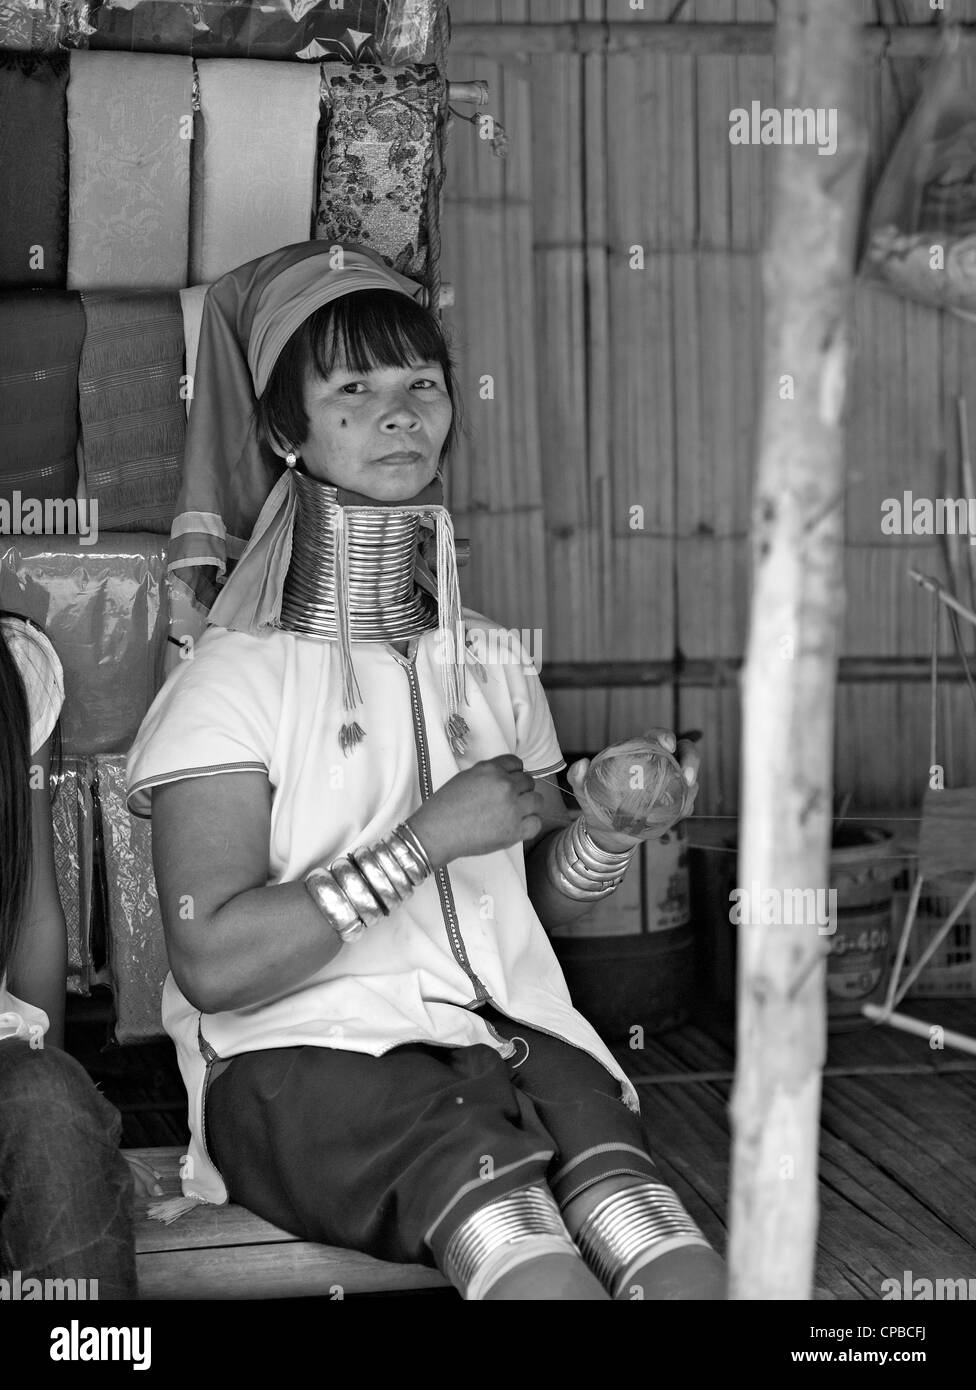 Long neck (Kayan) hill tribe woman of Northern Thailand. Chiang Mai province. Rural Thailand people S.E. Asia. Hill tribes Black and white photography Stock Photo